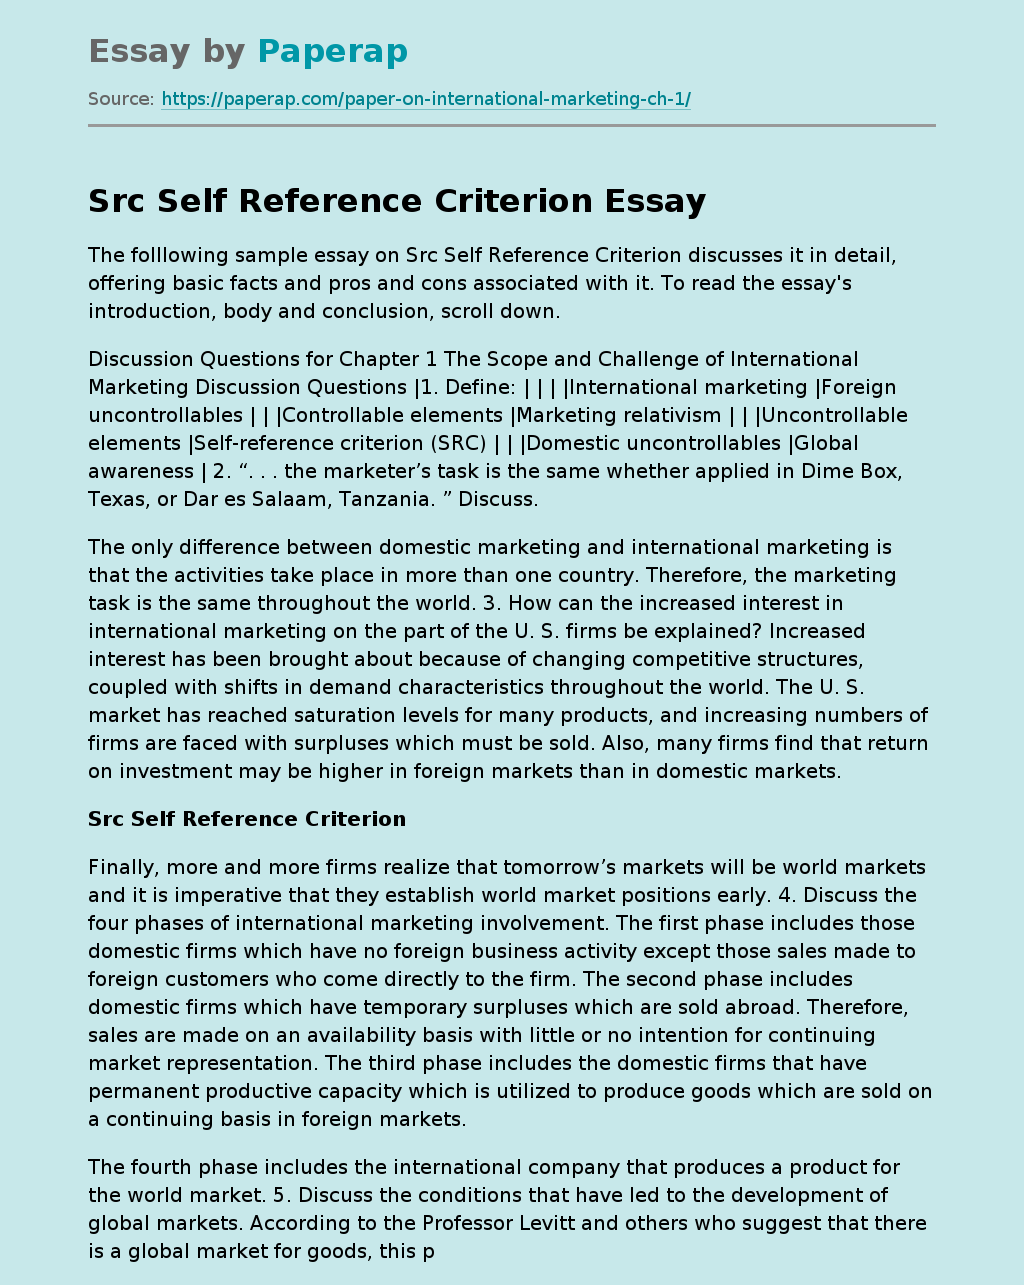 Src Self Reference Criterion